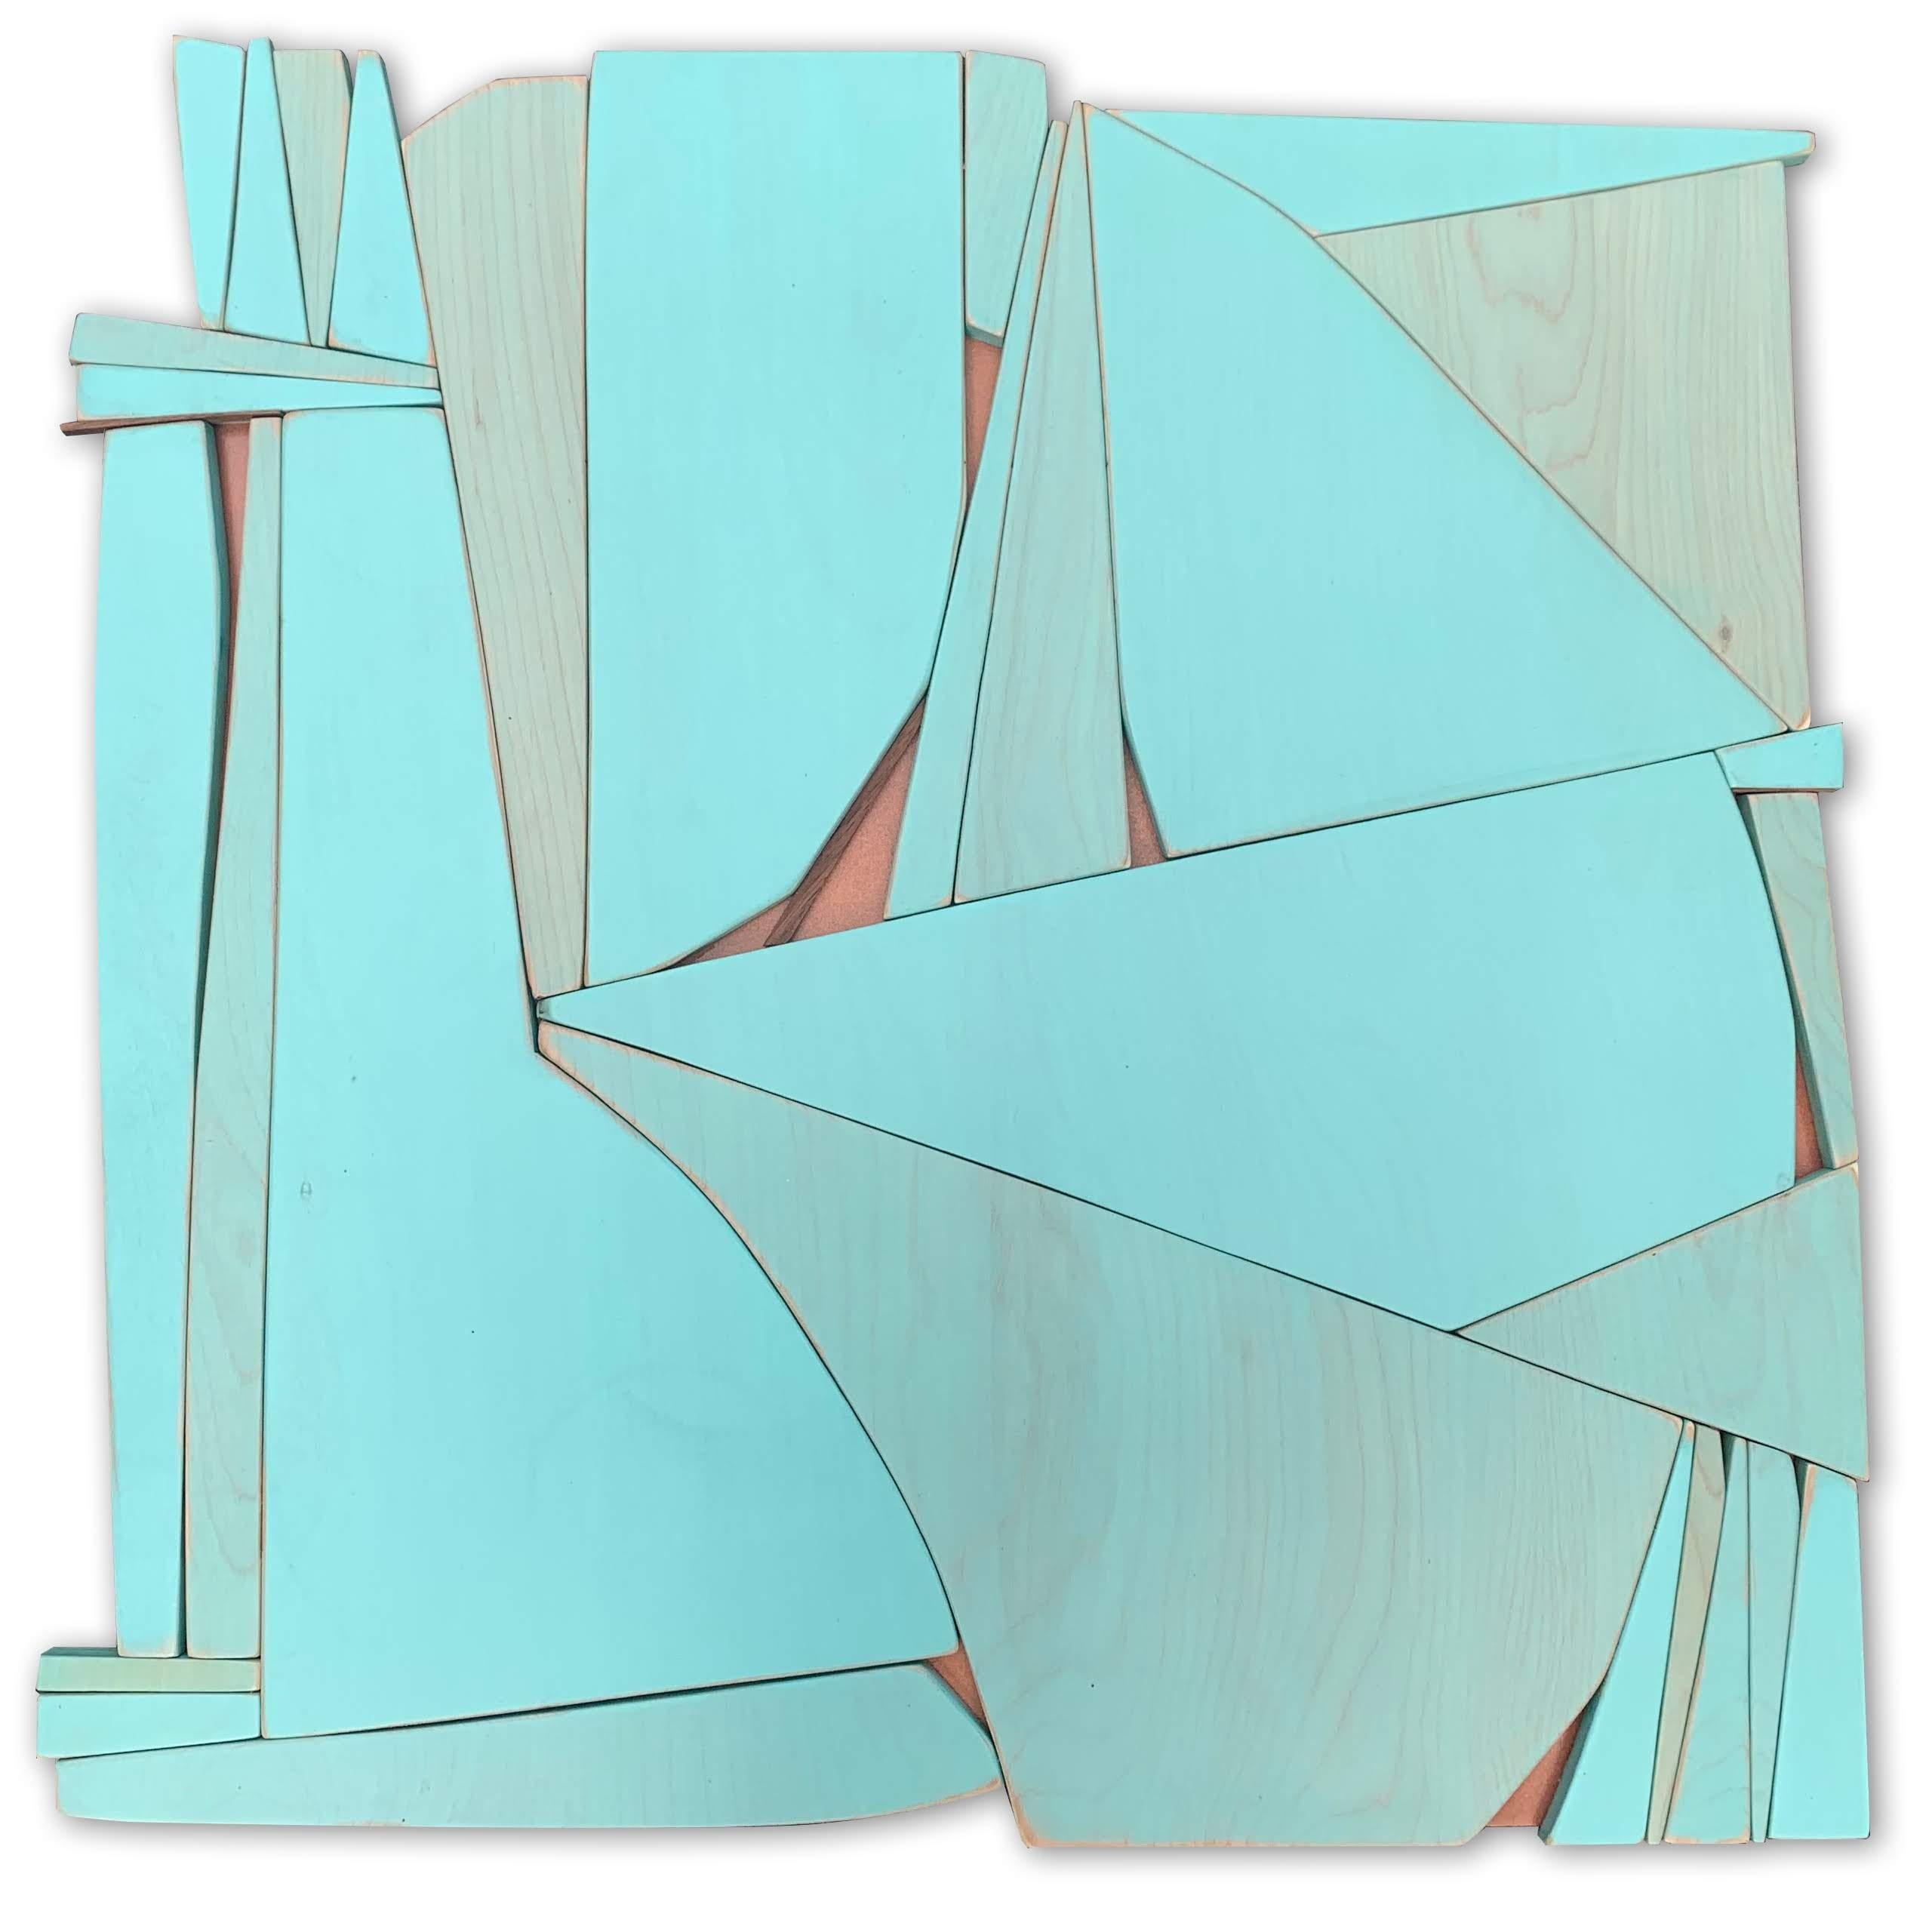 Scott Troxel
Tiki III, 2019
Acrylic washes on birch and walnut, mounted on mdf painted with metallic enamel. Satin Lacquer clear coat.
24 x 24 x 2/3 in.
(trox009)

This original abstract wooden wall sculpture by Scott Troxel has a mid-century modern